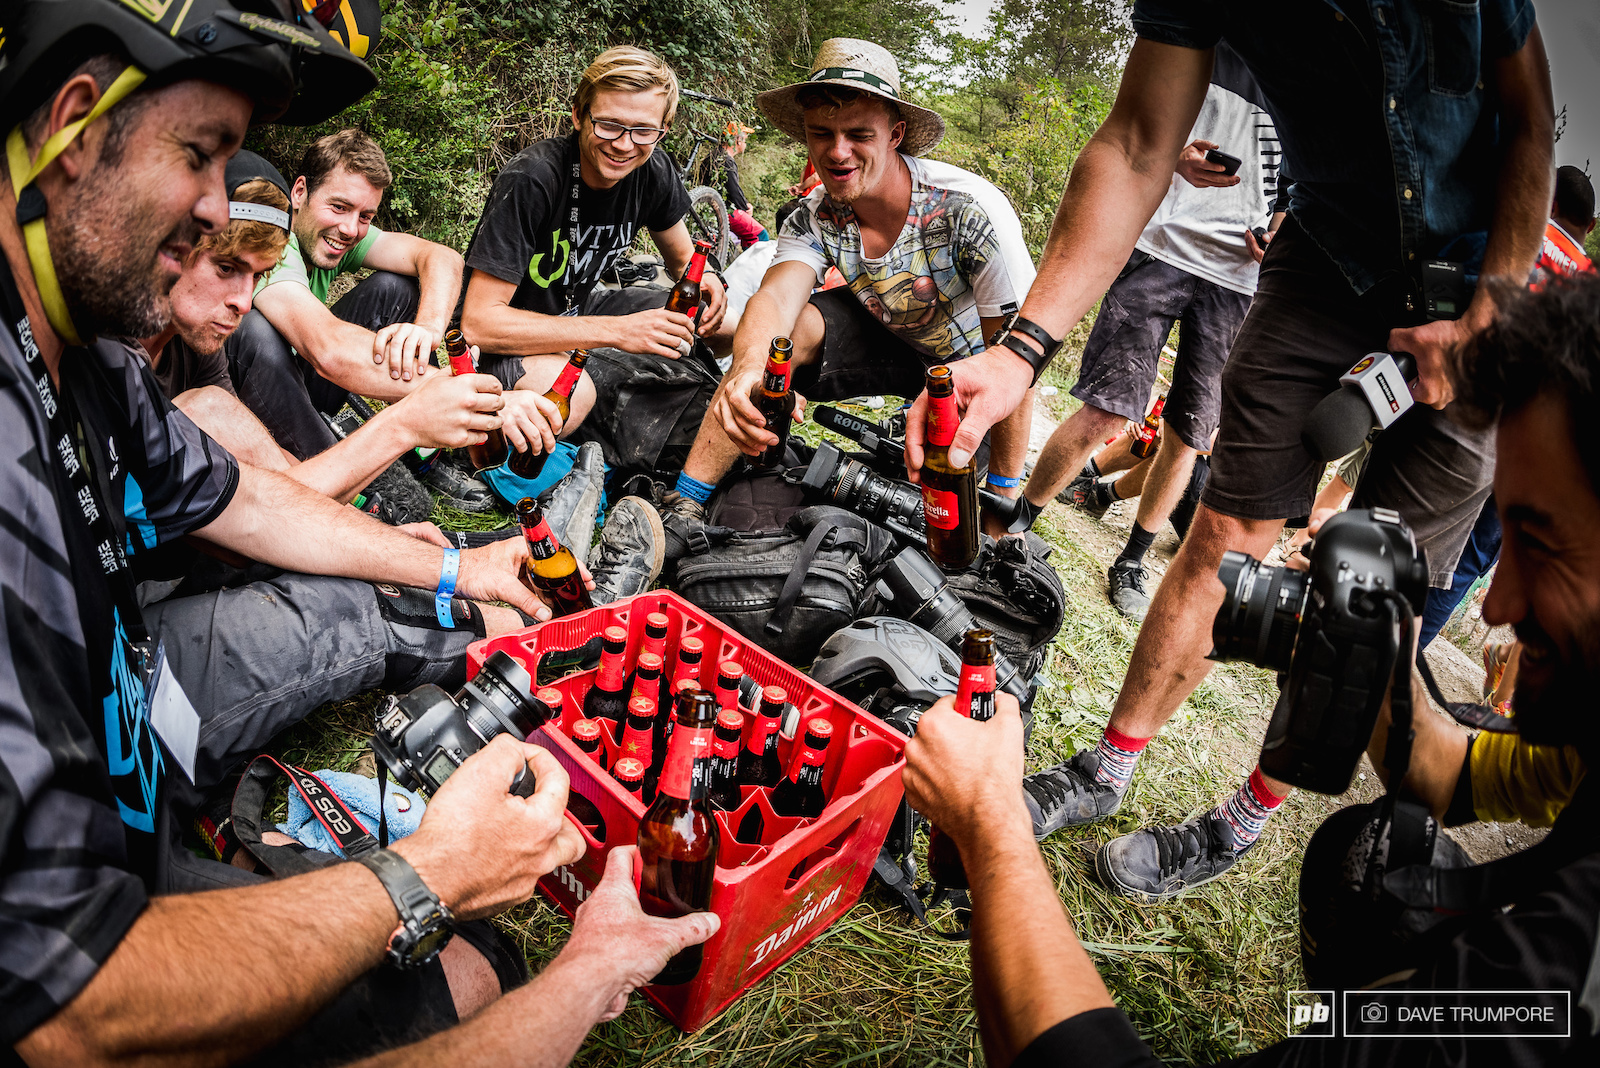 The EWS media crew enjoys some refreshments on stage 7.5 during a massive delay that eventually eneded in the cancellation of stage eight.